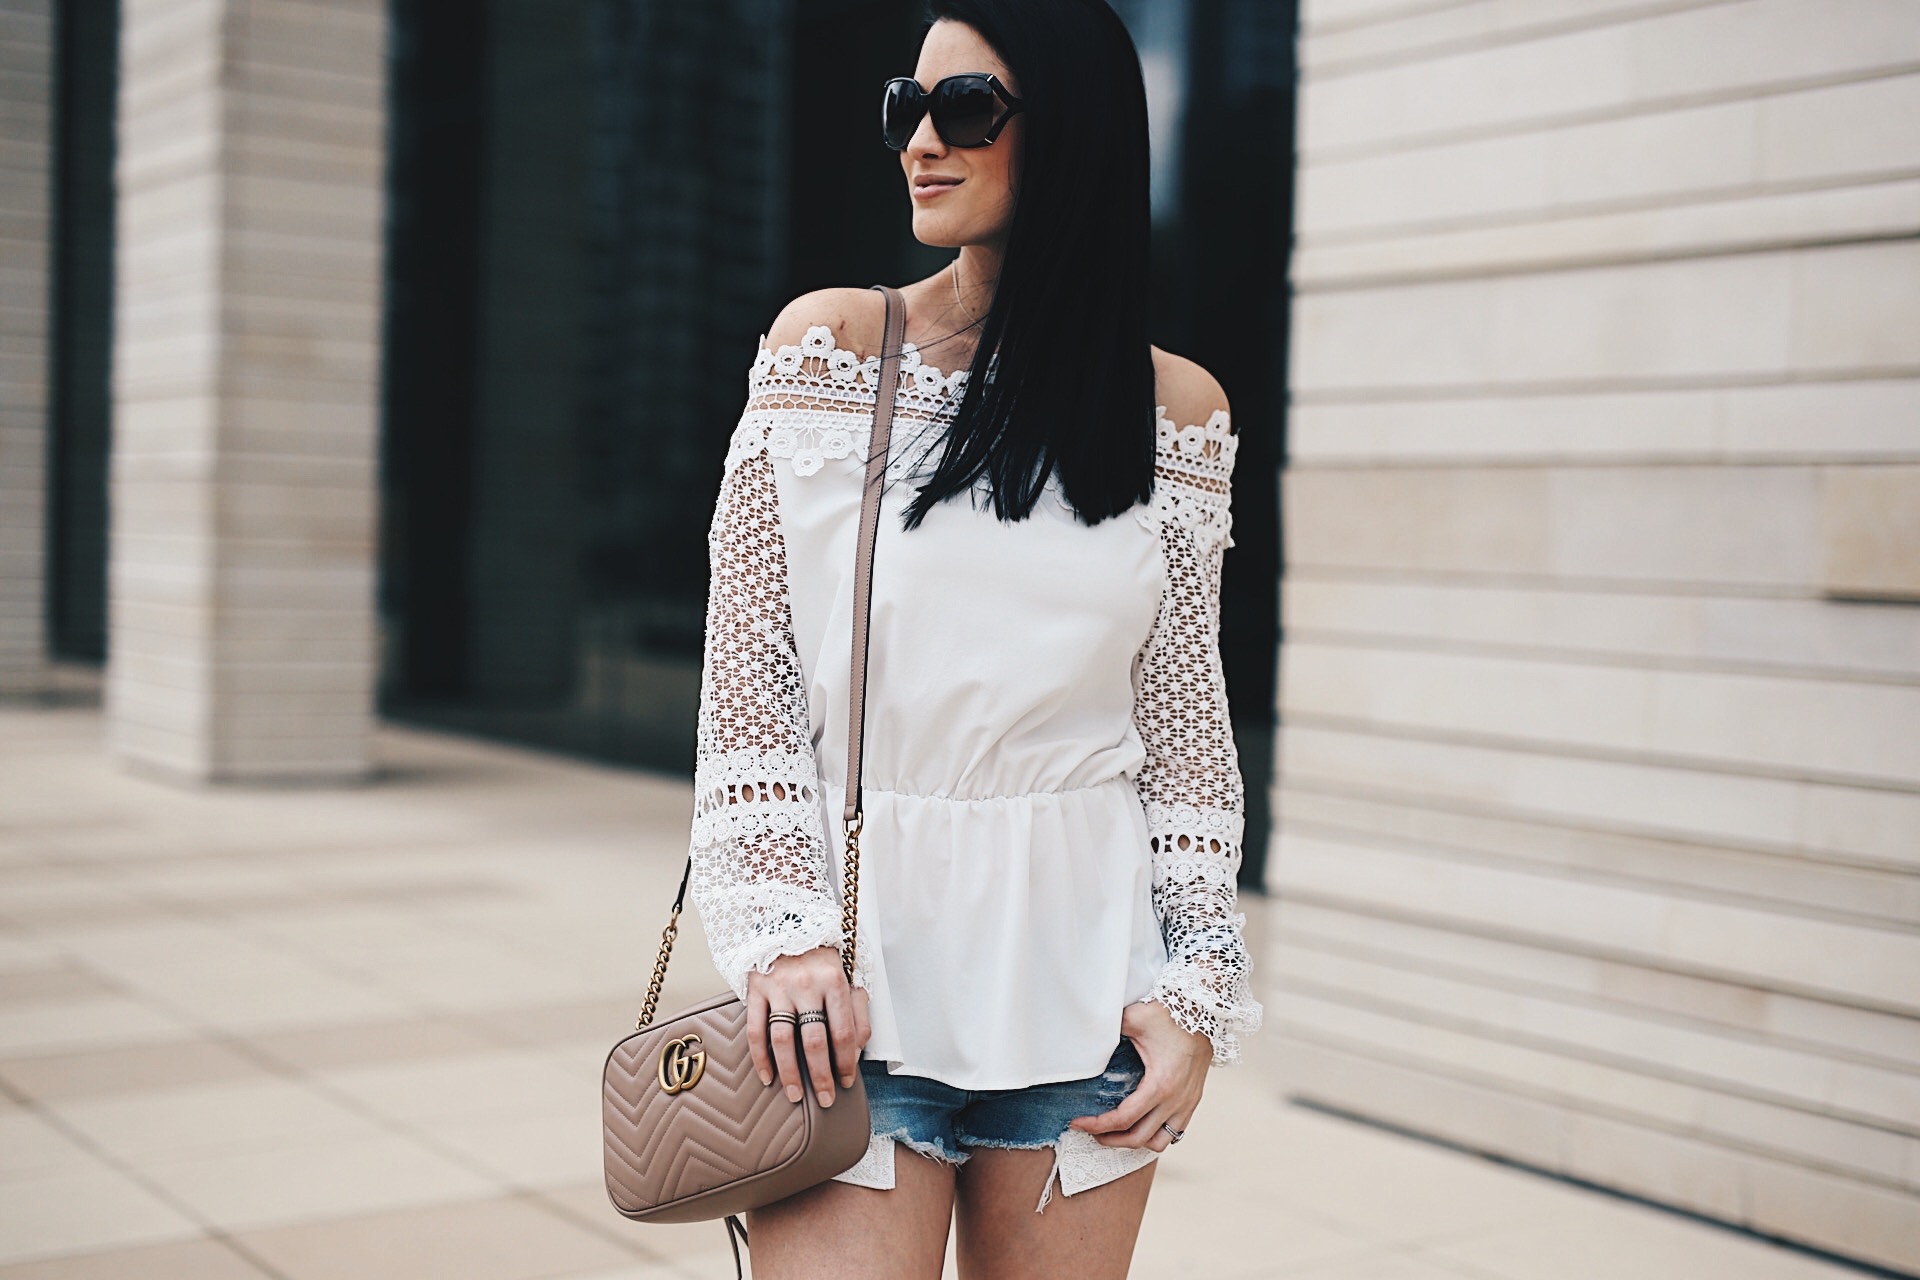 DTKAustin shows us how to wear the highly coveted off-the-shoulder trend with Chicwish, cutoff shorts and wedges from Stuart Weitzman. Want more summer inspiration? Click to get more details!